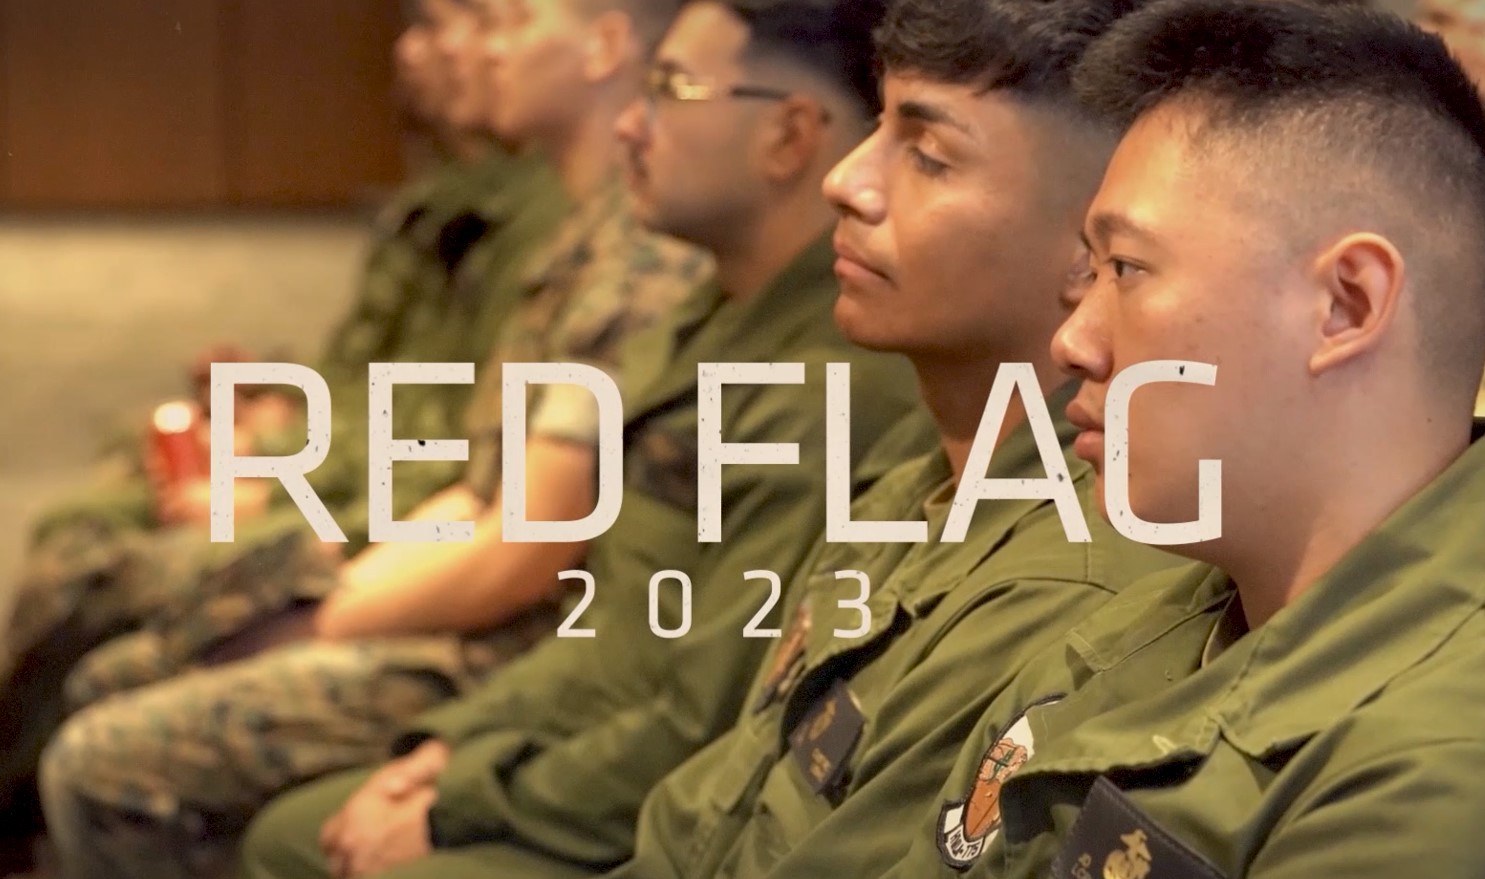 Red Flag Rescue 2023